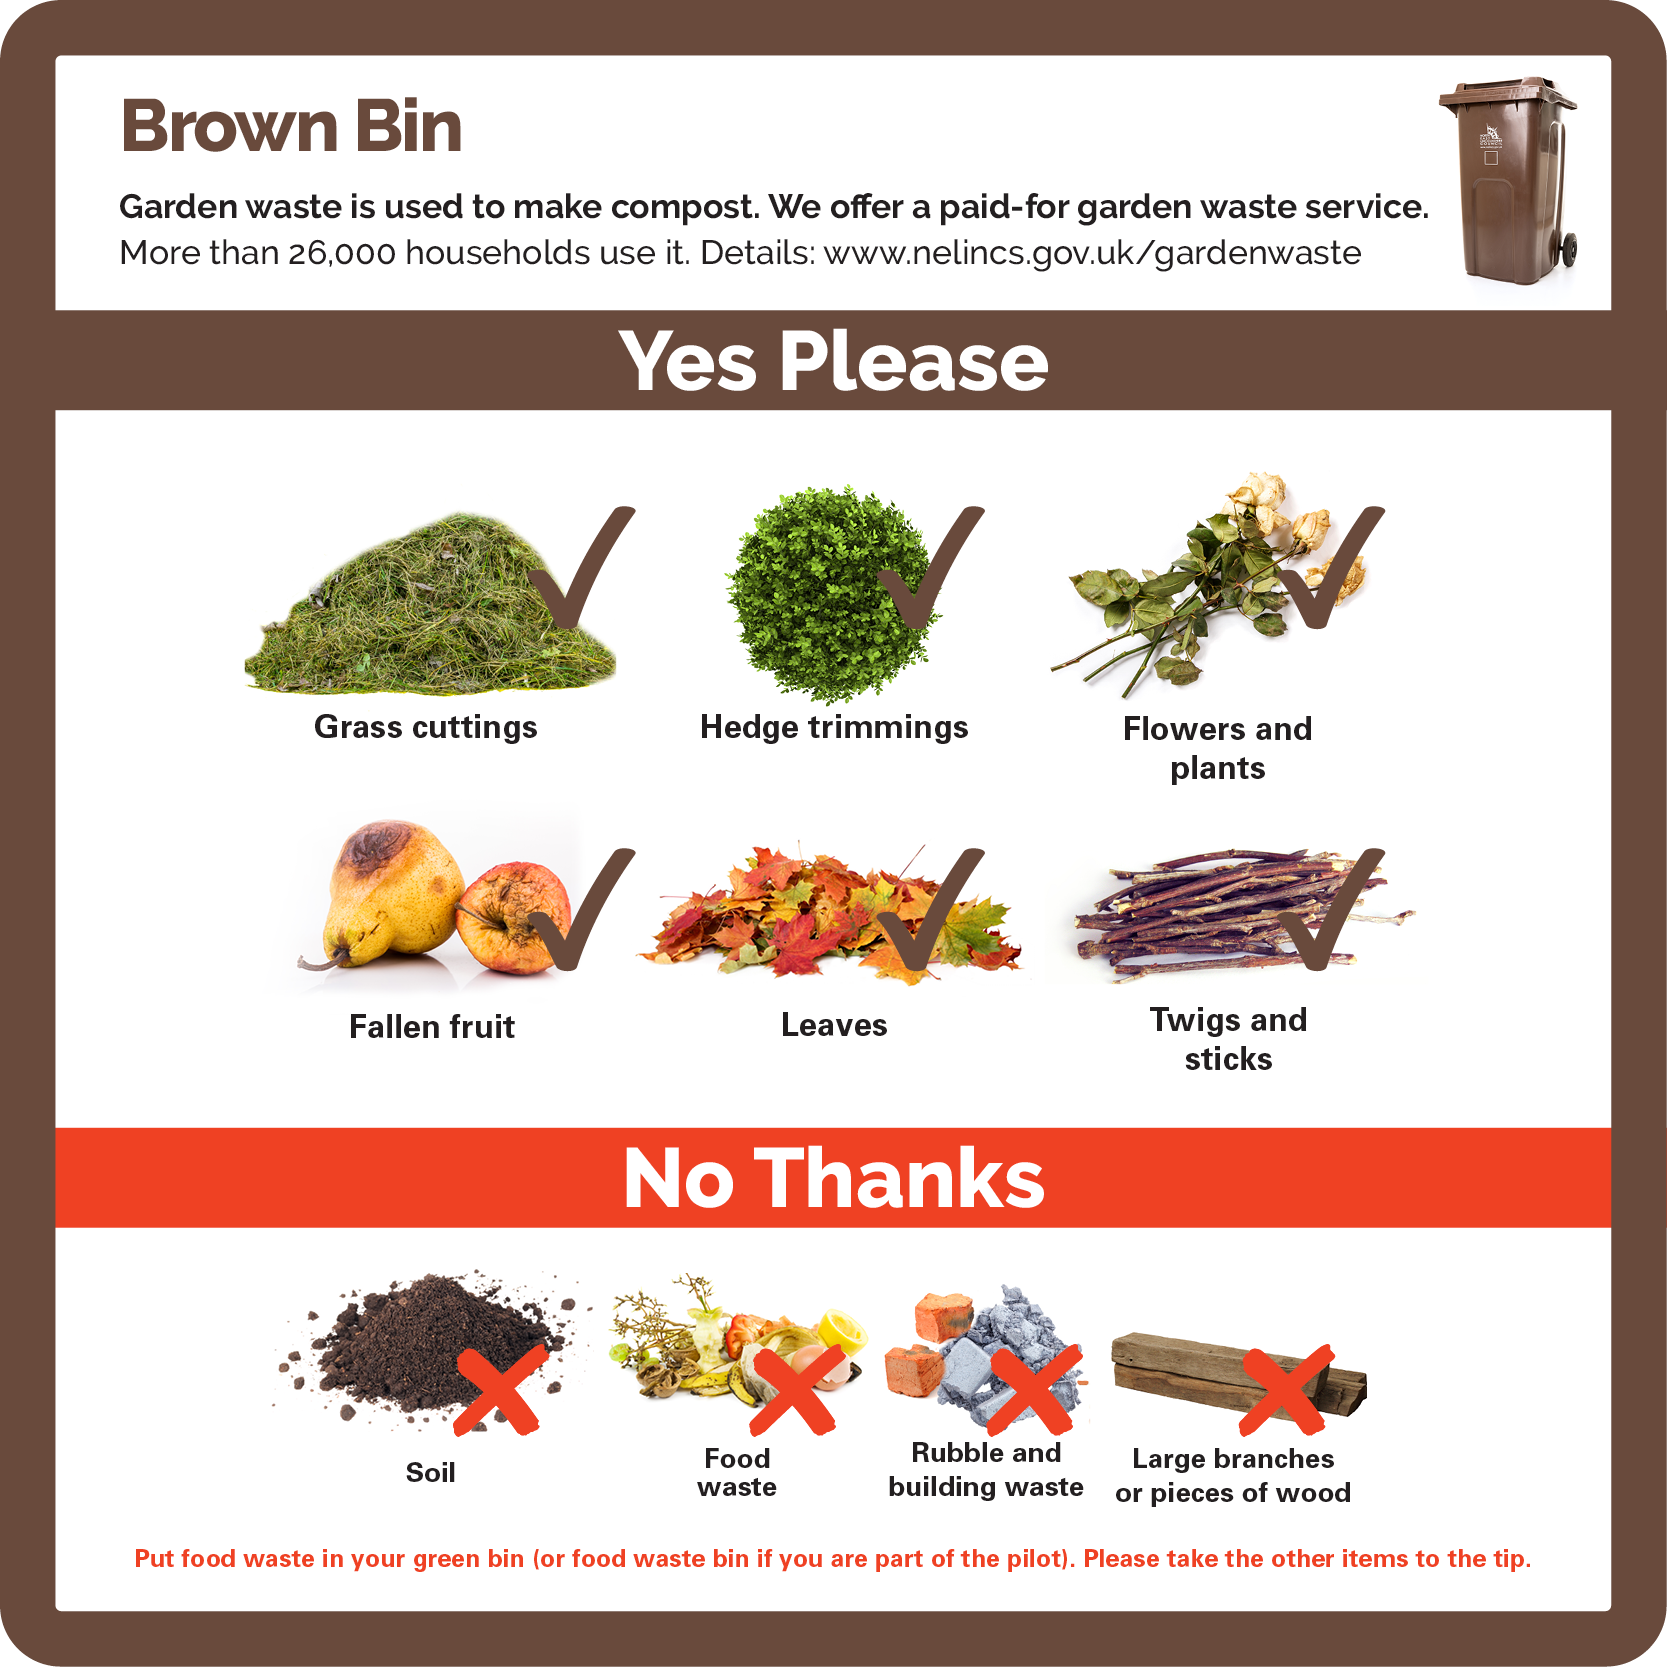 An image showing items that go in the brown bin